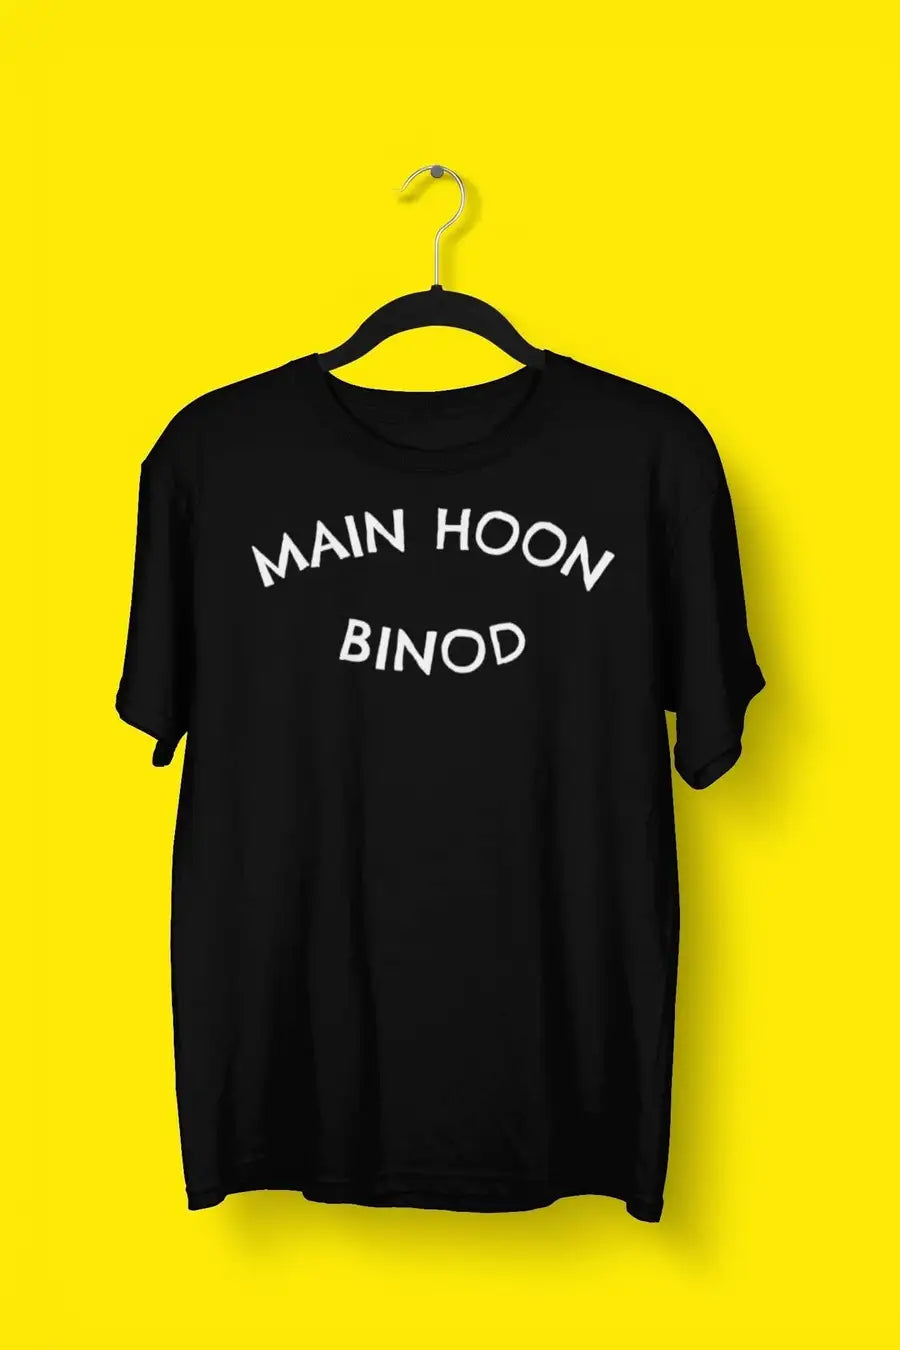 Main Hoon Binod Exclusive T Shirt for Men | Premium Design | Catch My Drift India - Catch My Drift India Clothing black, bollywood, clothing, funny, made in india, multi colour, shirt, t shir